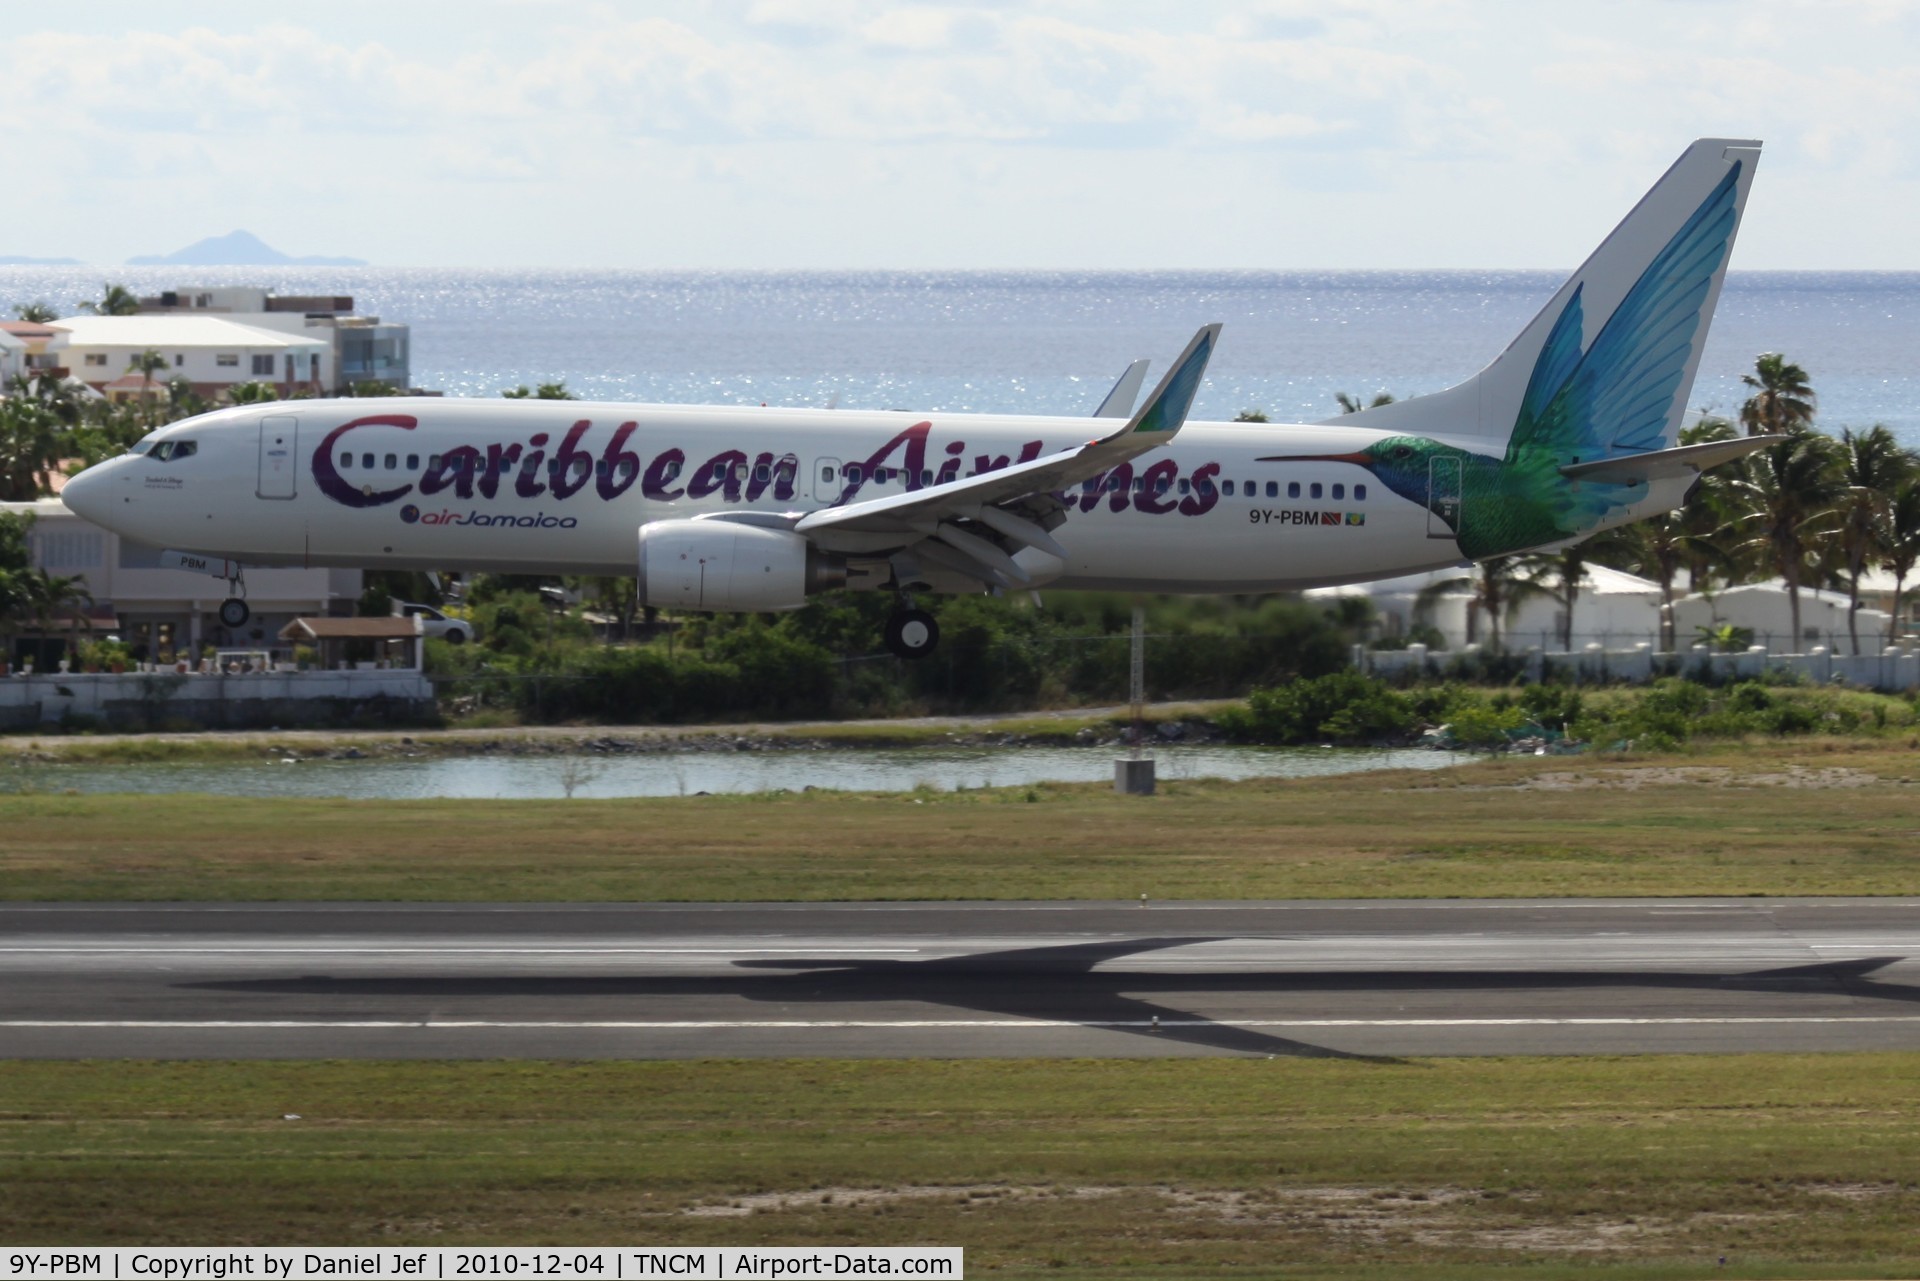 9Y-PBM, 2007 Boeing 737-8BK C/N 29635, Caribbean airlines landing at TNCM with flashing a air jamaica logo!!!